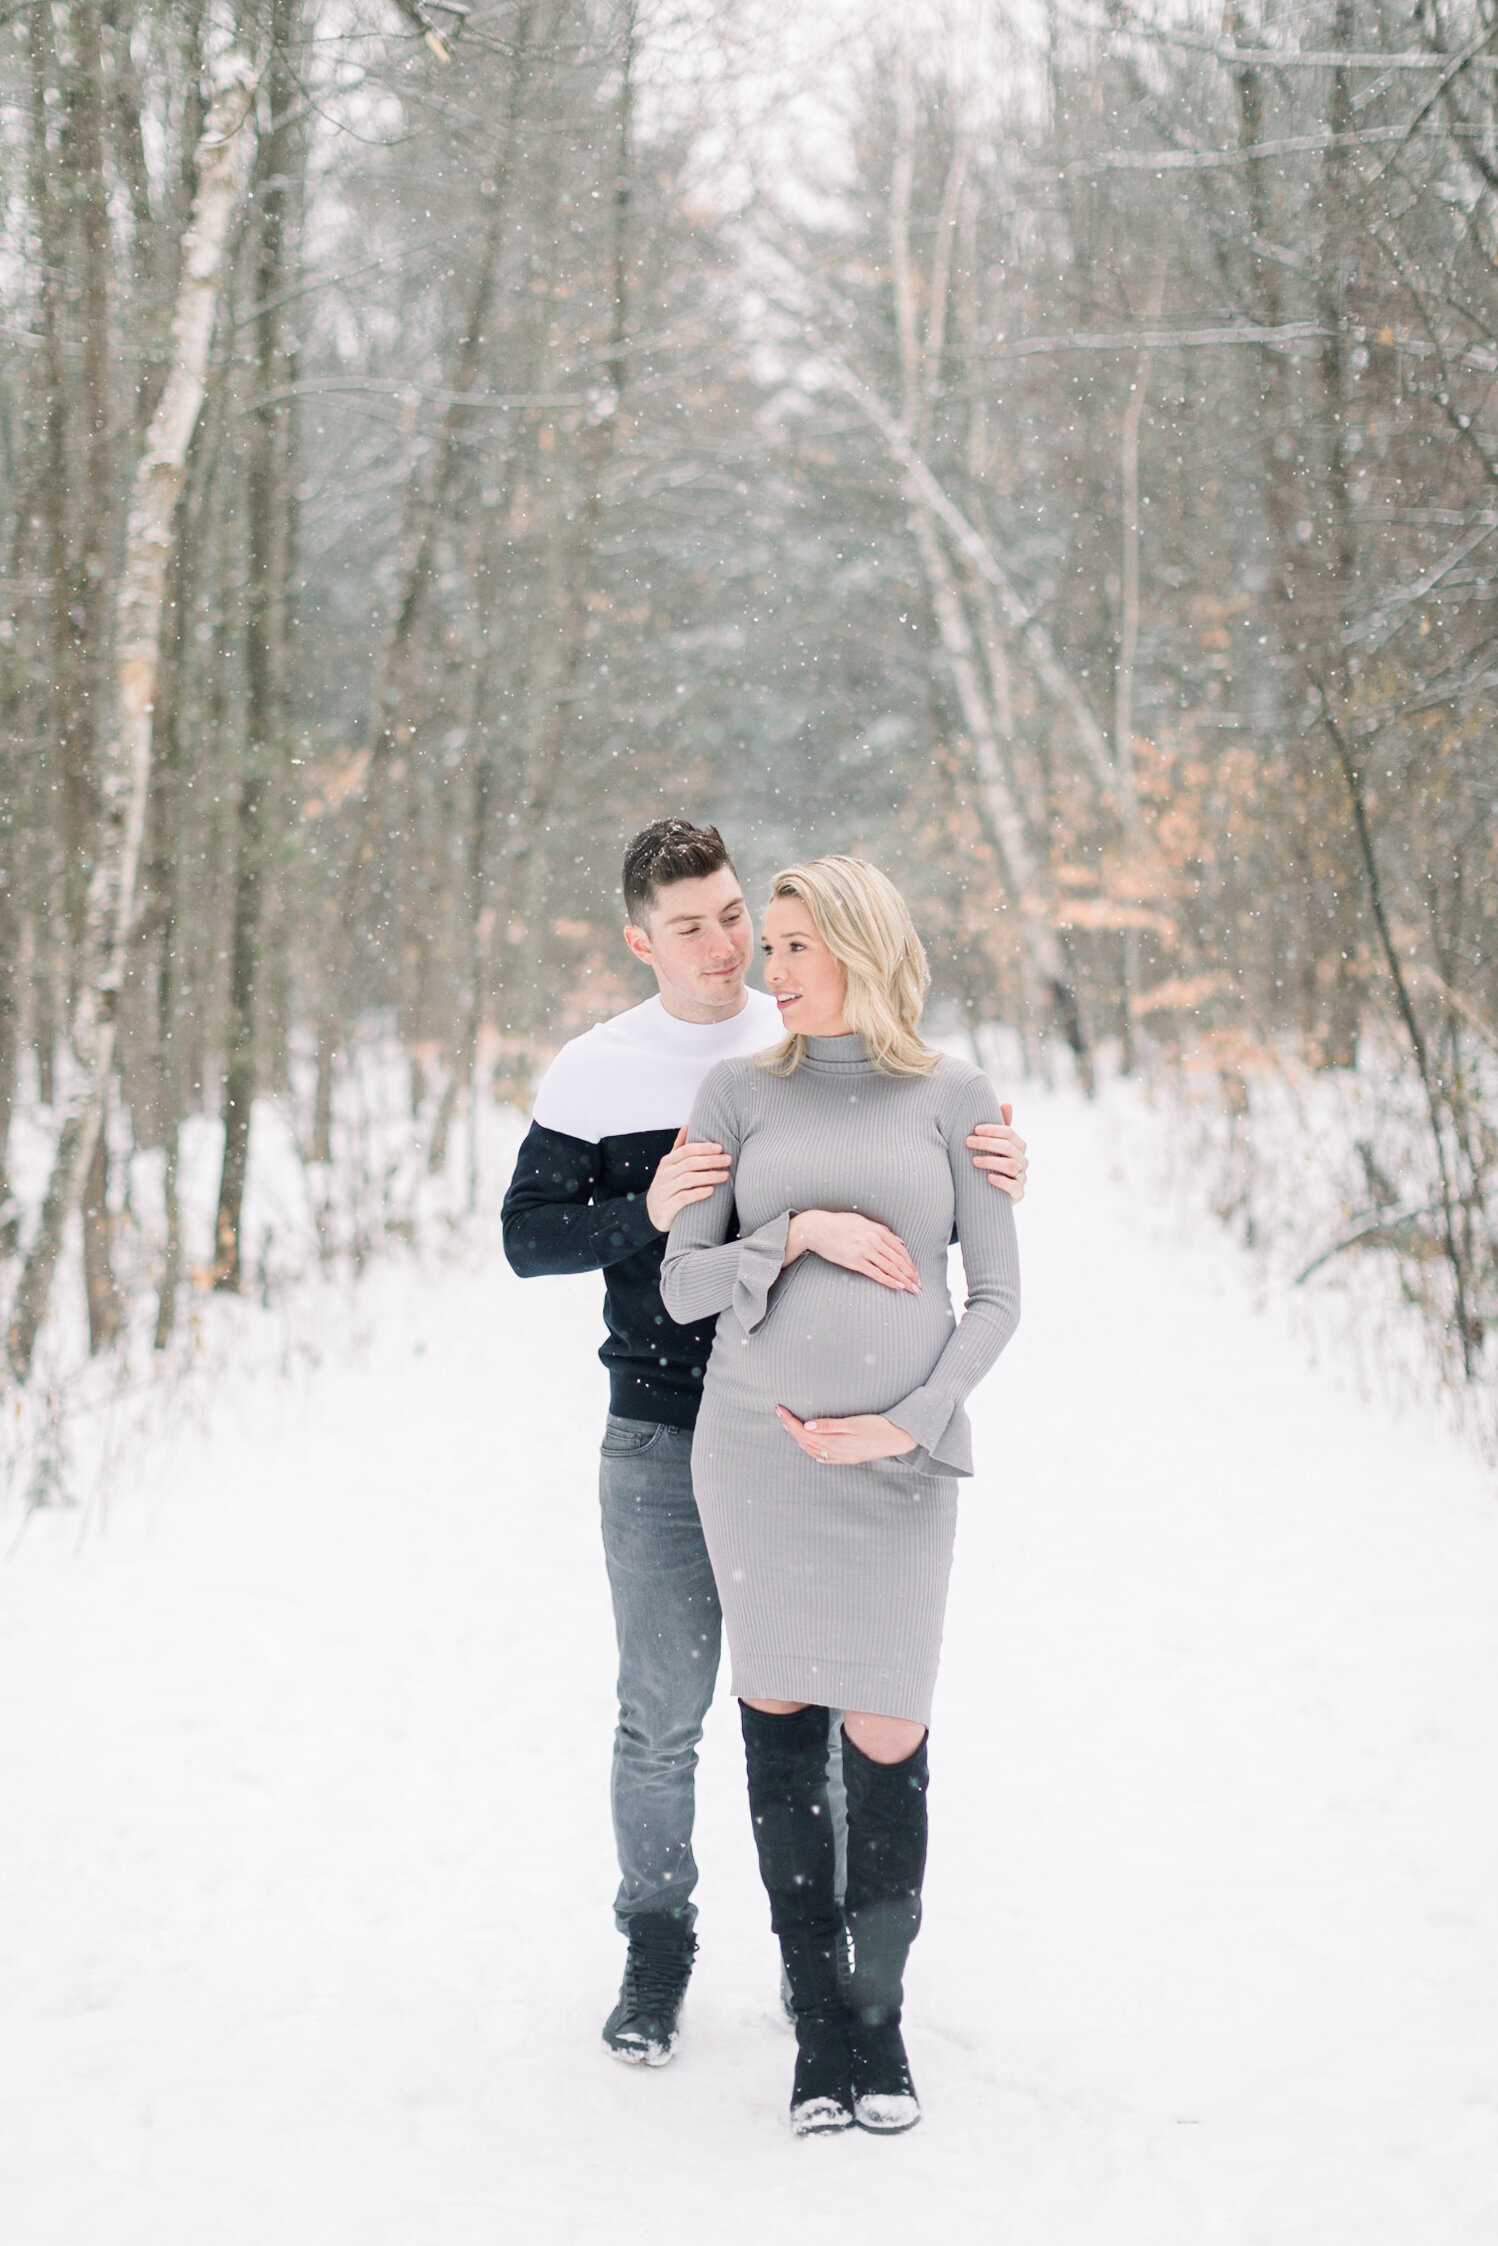  A husband holds his glowing wife as she cradles her pregnant belly  in a beautiful Pinhey’s Trails, Ottawa photo shoot session by Chelsea Mason Photography.   Couple goals maternity session inspiration ideas and goals winter goals outdoor photo shoo